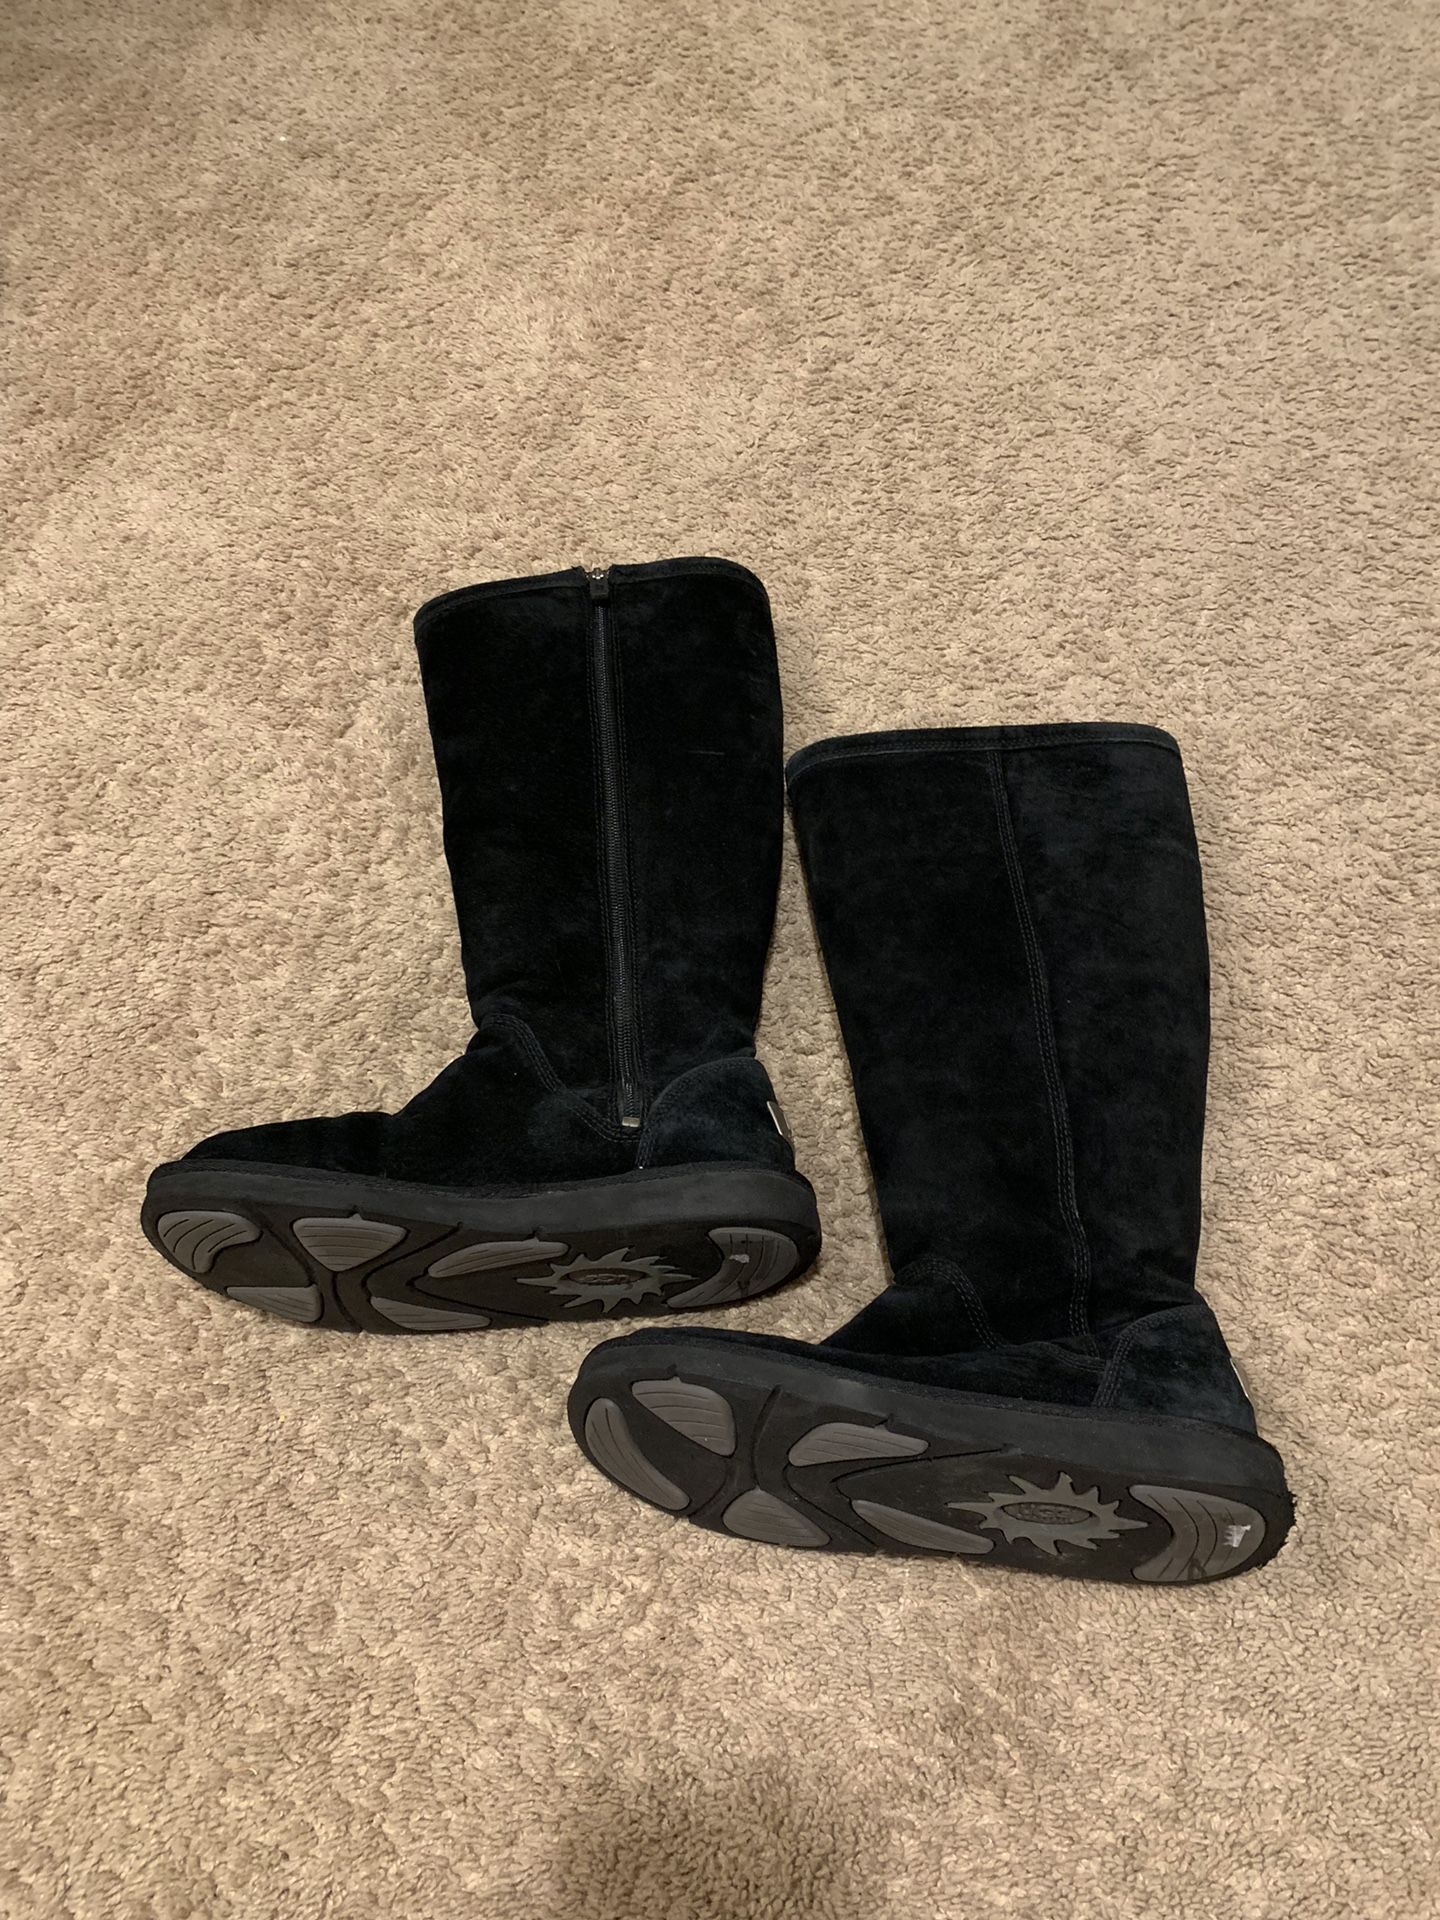 Uggs - Tall black with zipper Size 7 Women’s